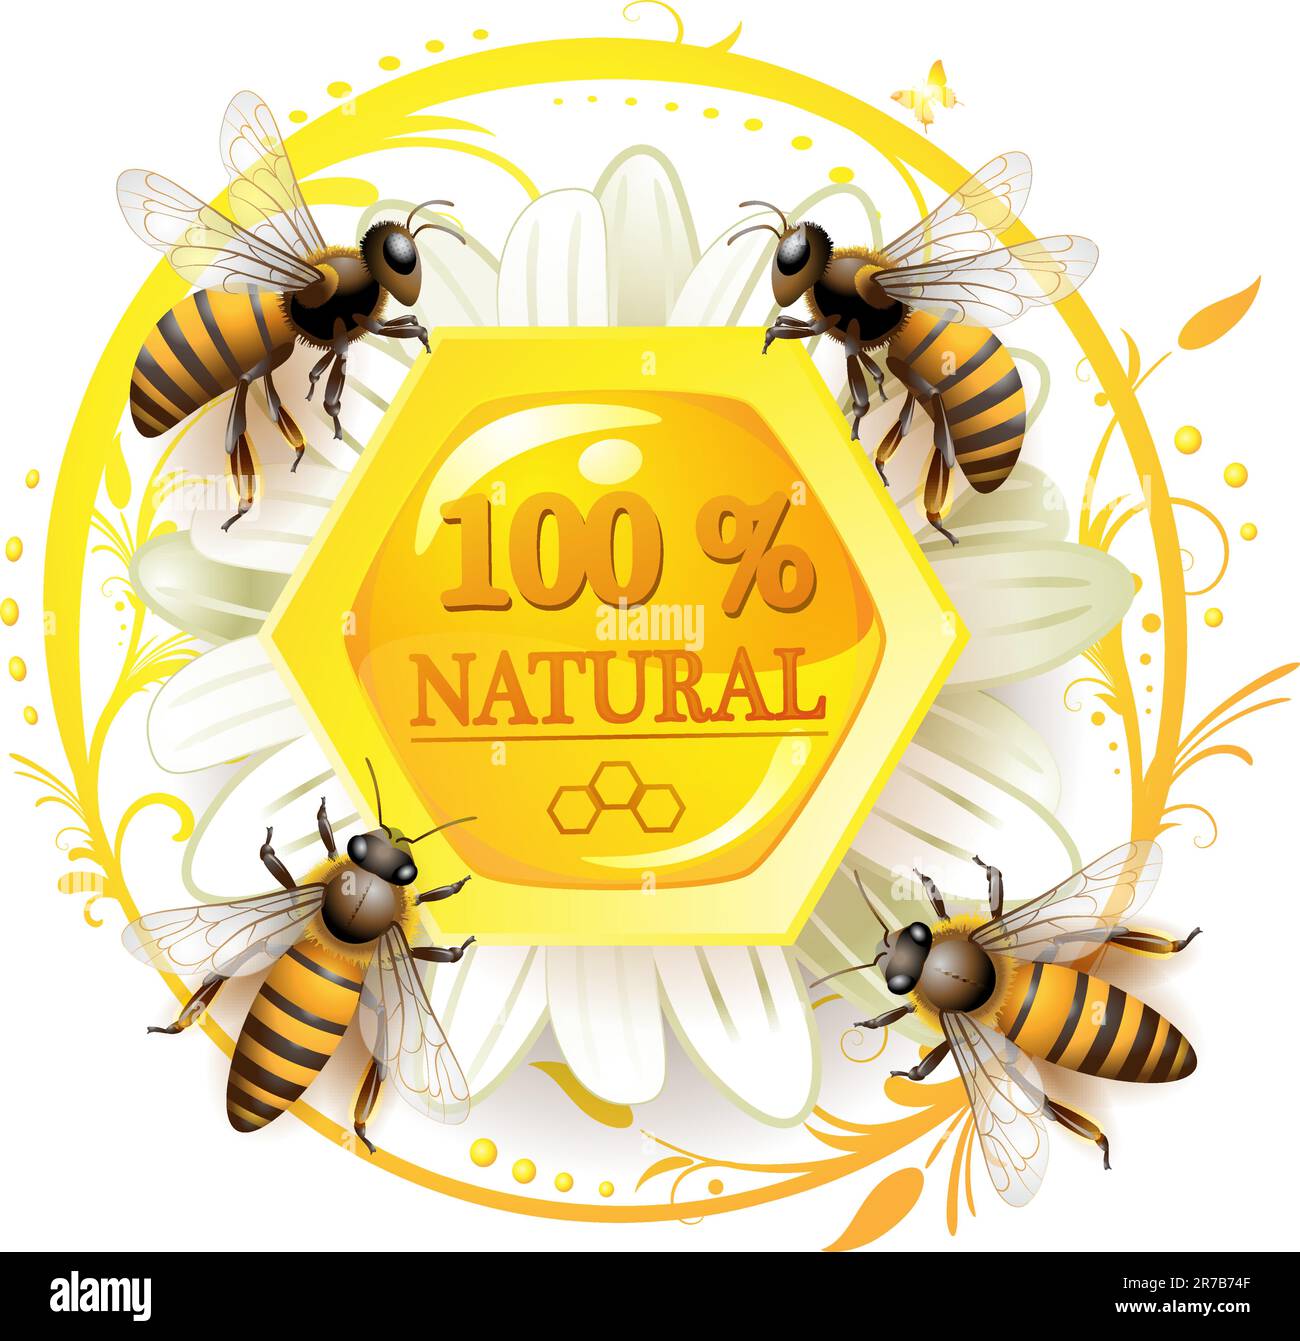 Bees and honeycombs over floral background isolated on white Stock Vector